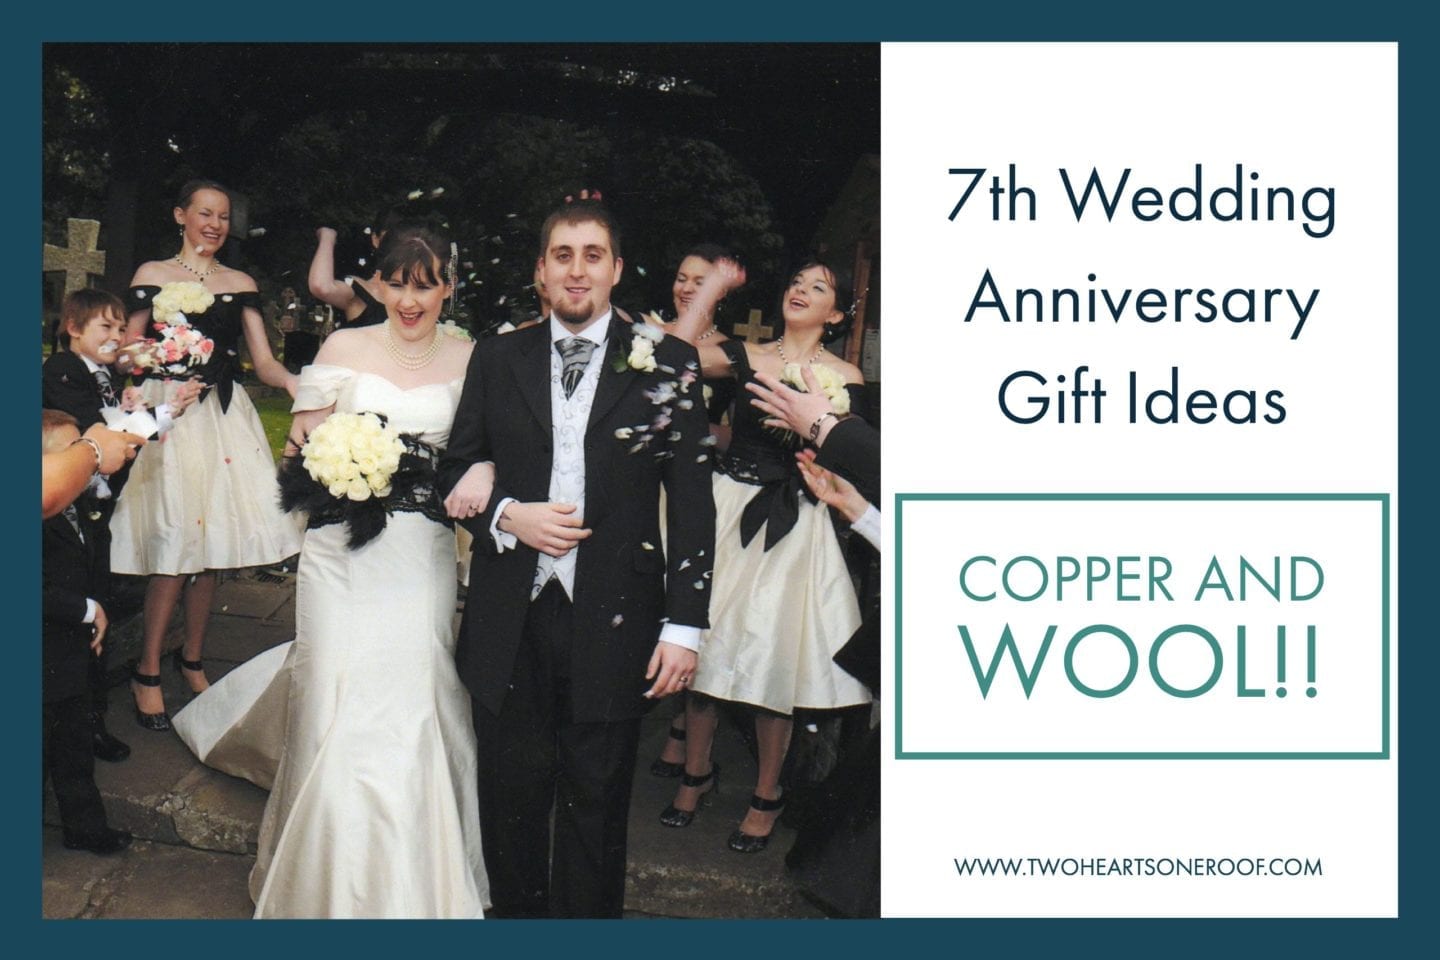 7th Wedding Anniversary Gift Ideas For Him and Her – Copper and Wool Gift Ideas